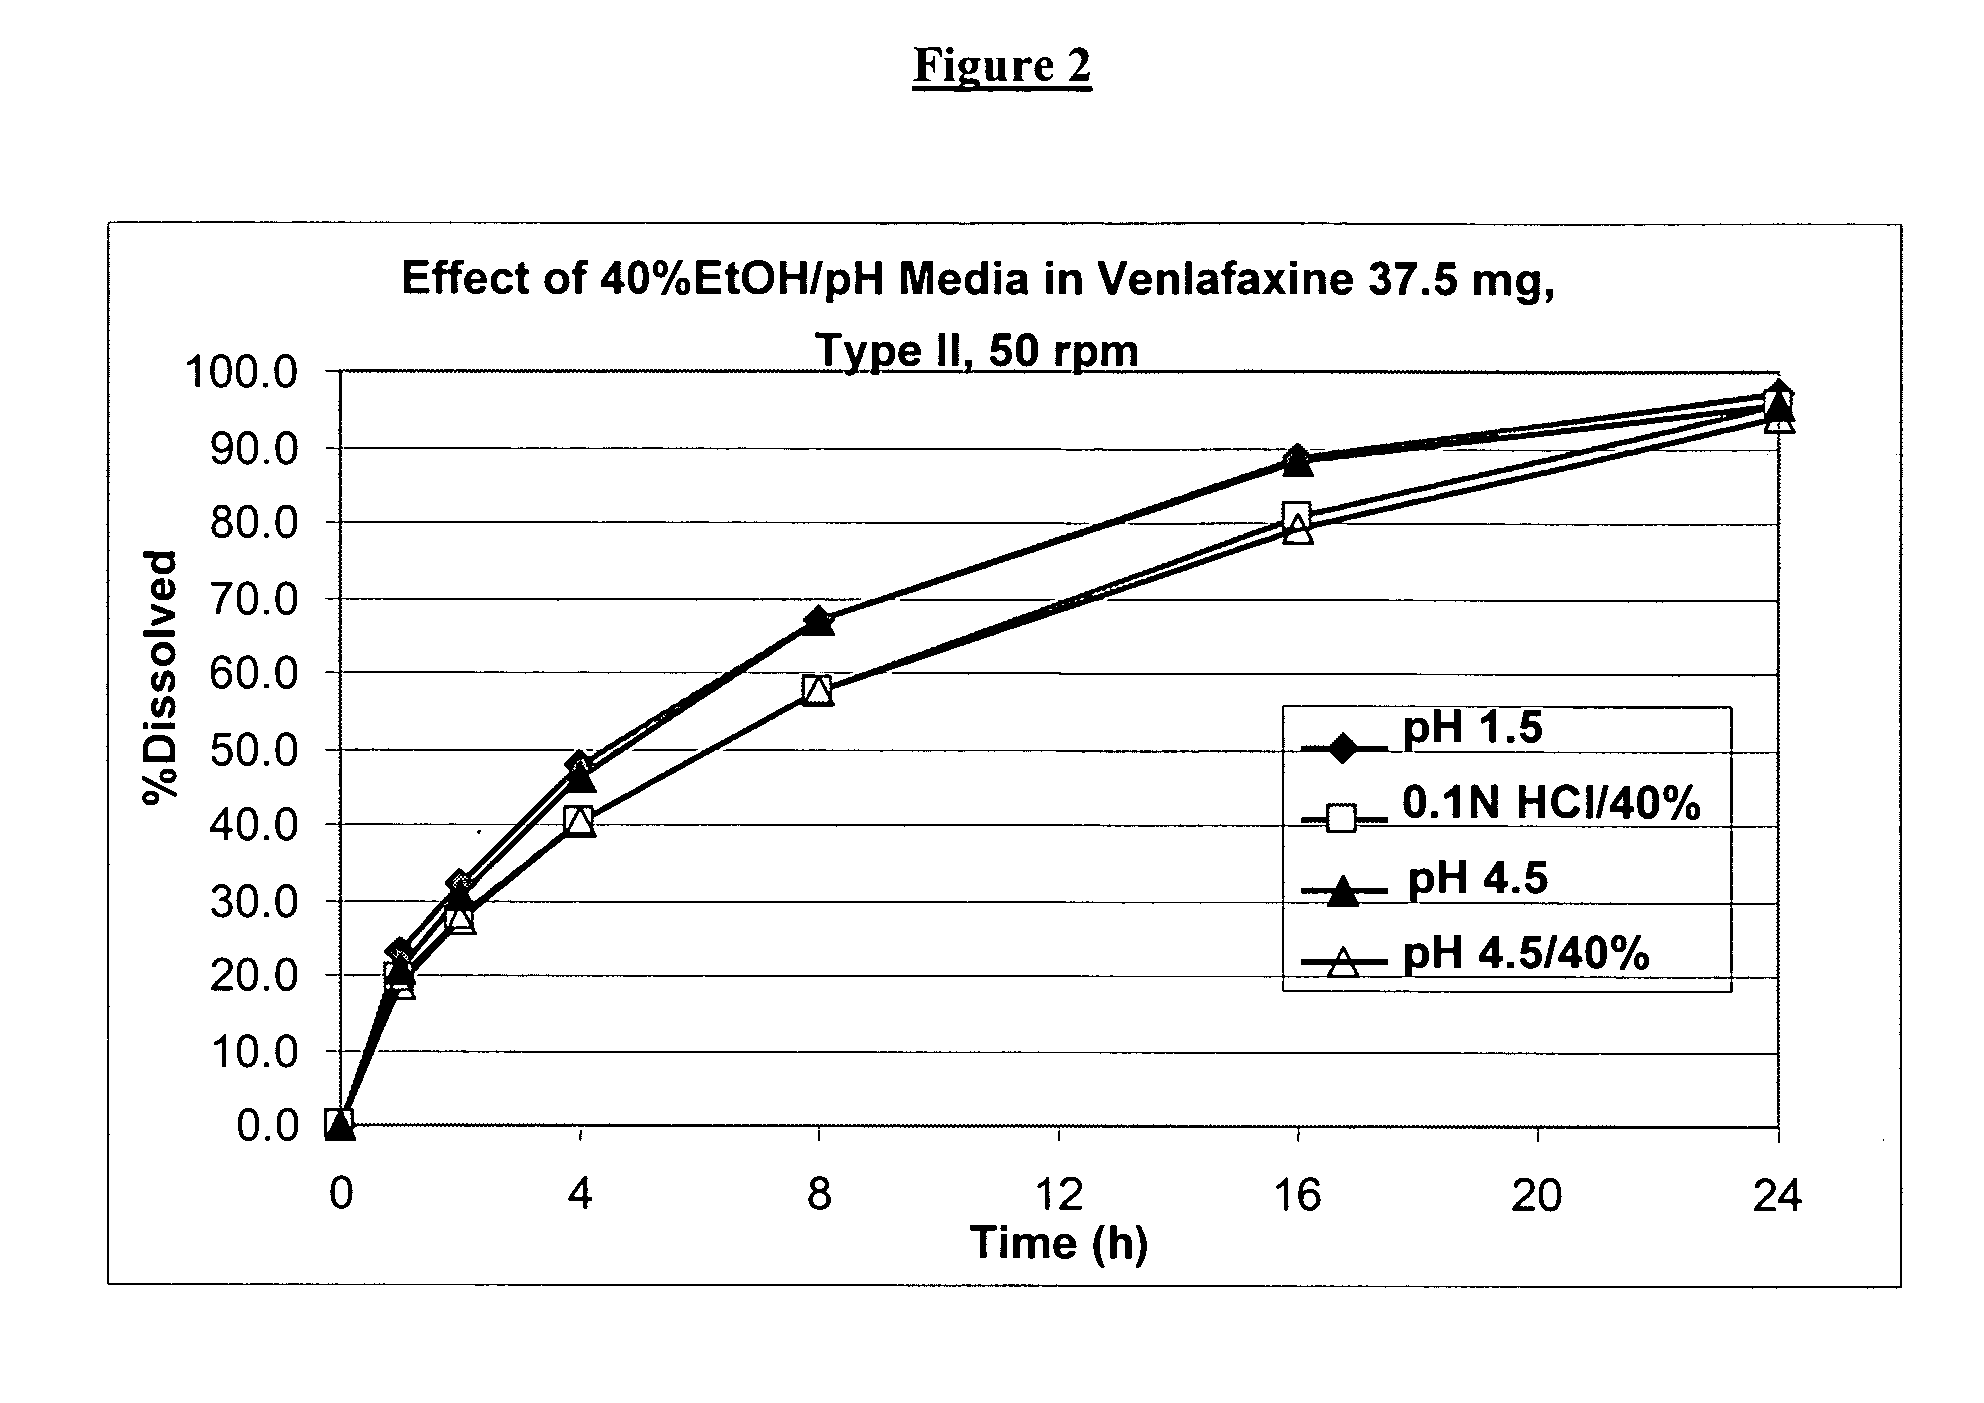 Controlled release venlafaxine formulations